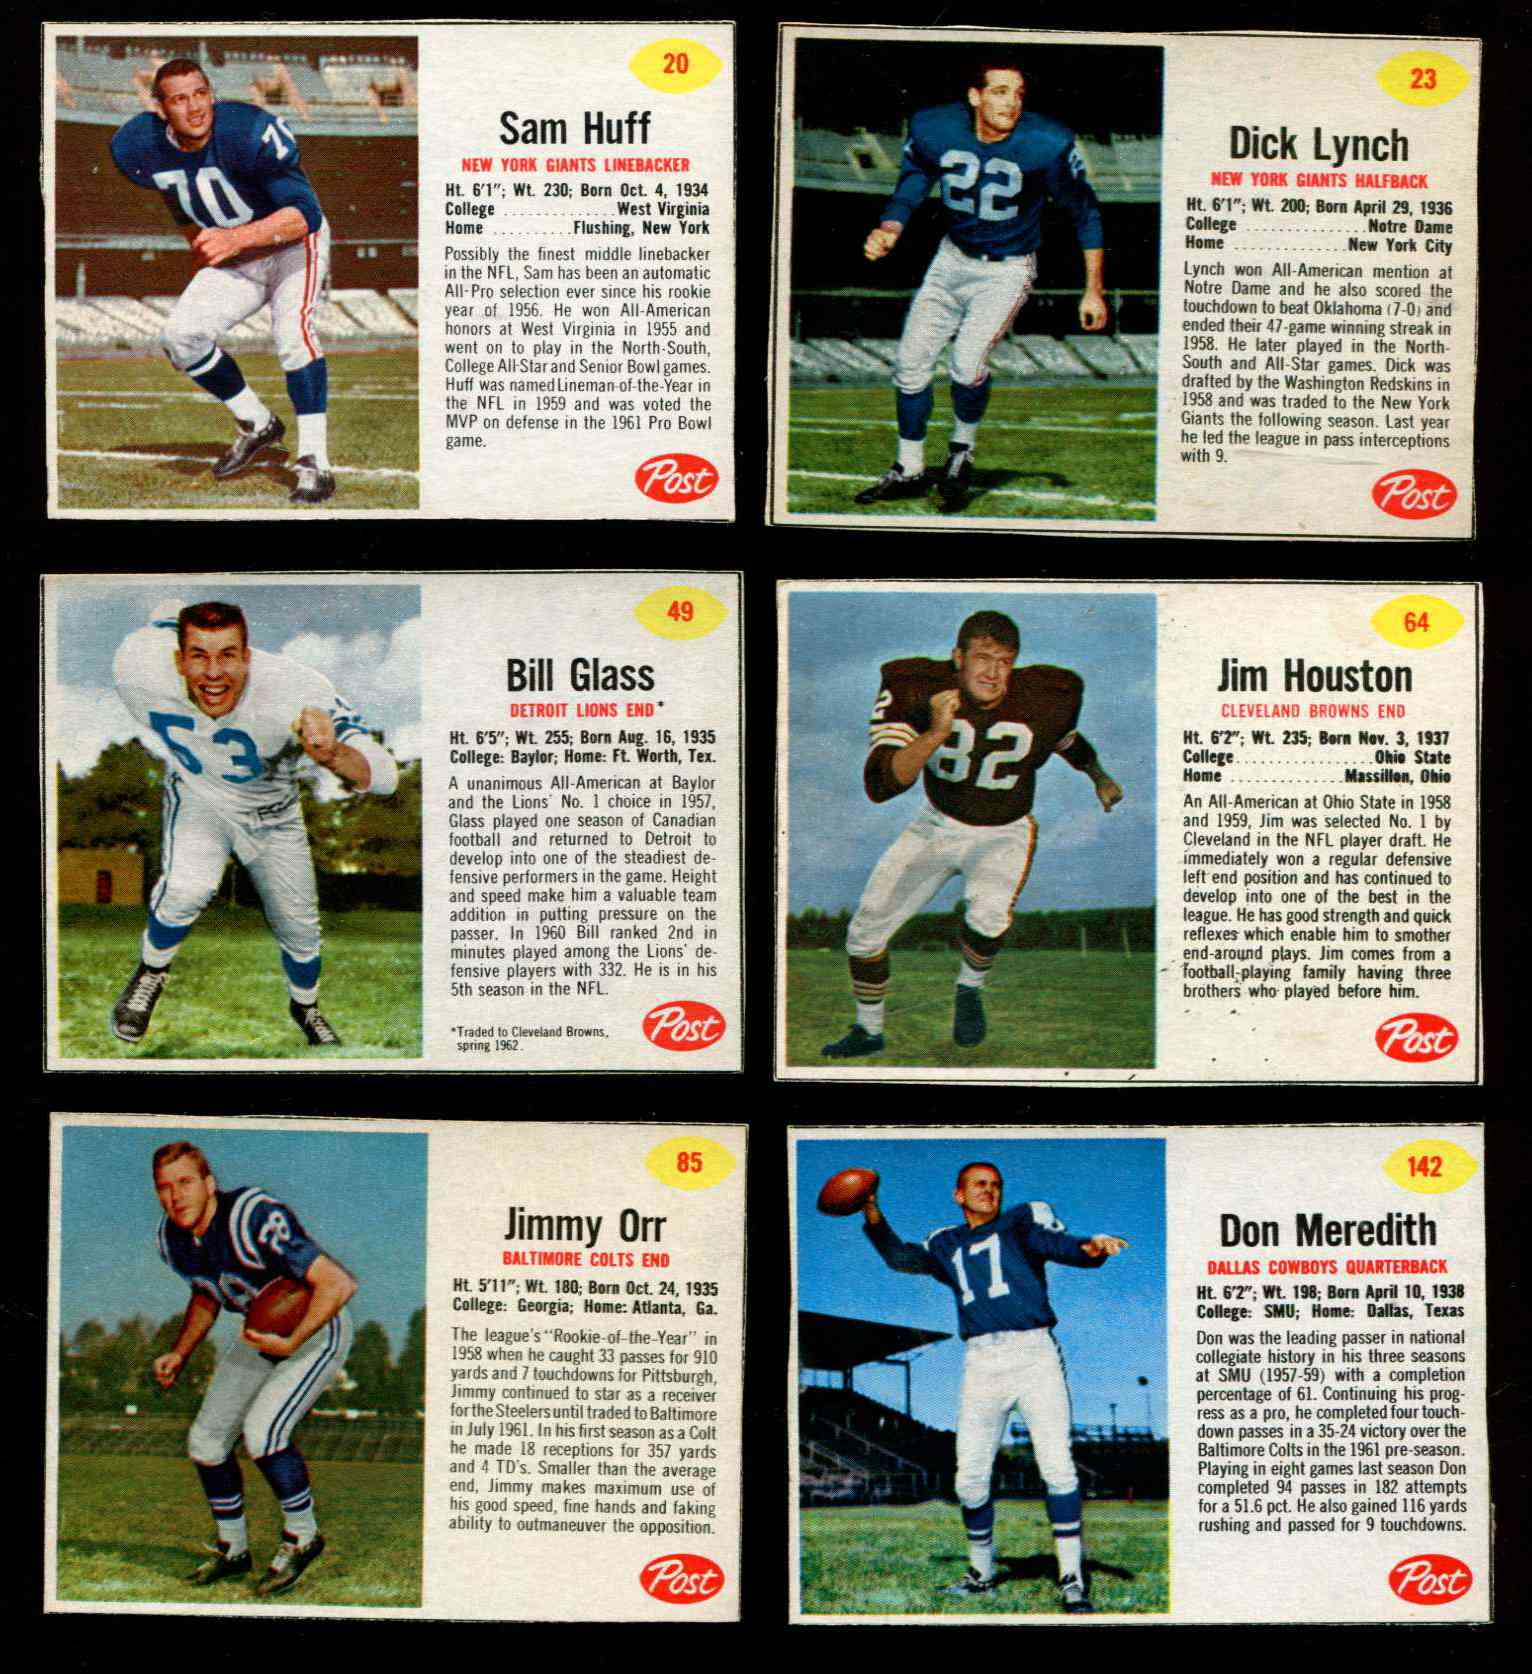 1962 Post Cereal FB #142 Don Meredith (Cowboys) Football cards value